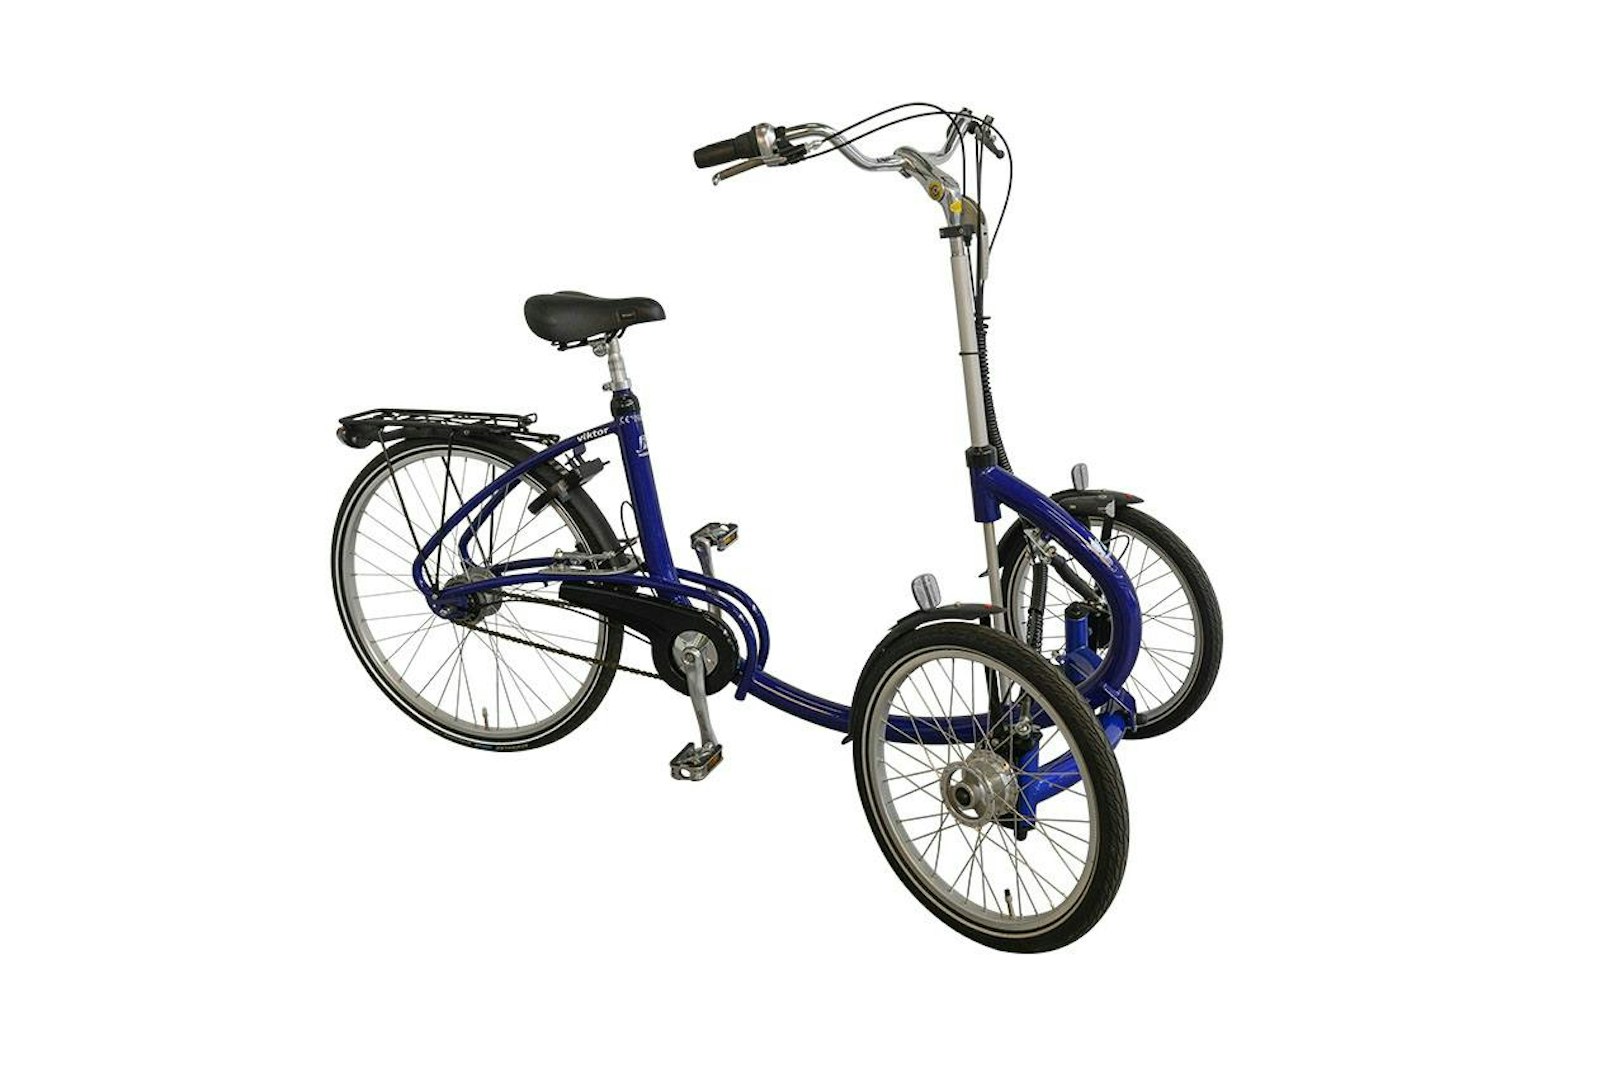 2 seater tricycle for adults